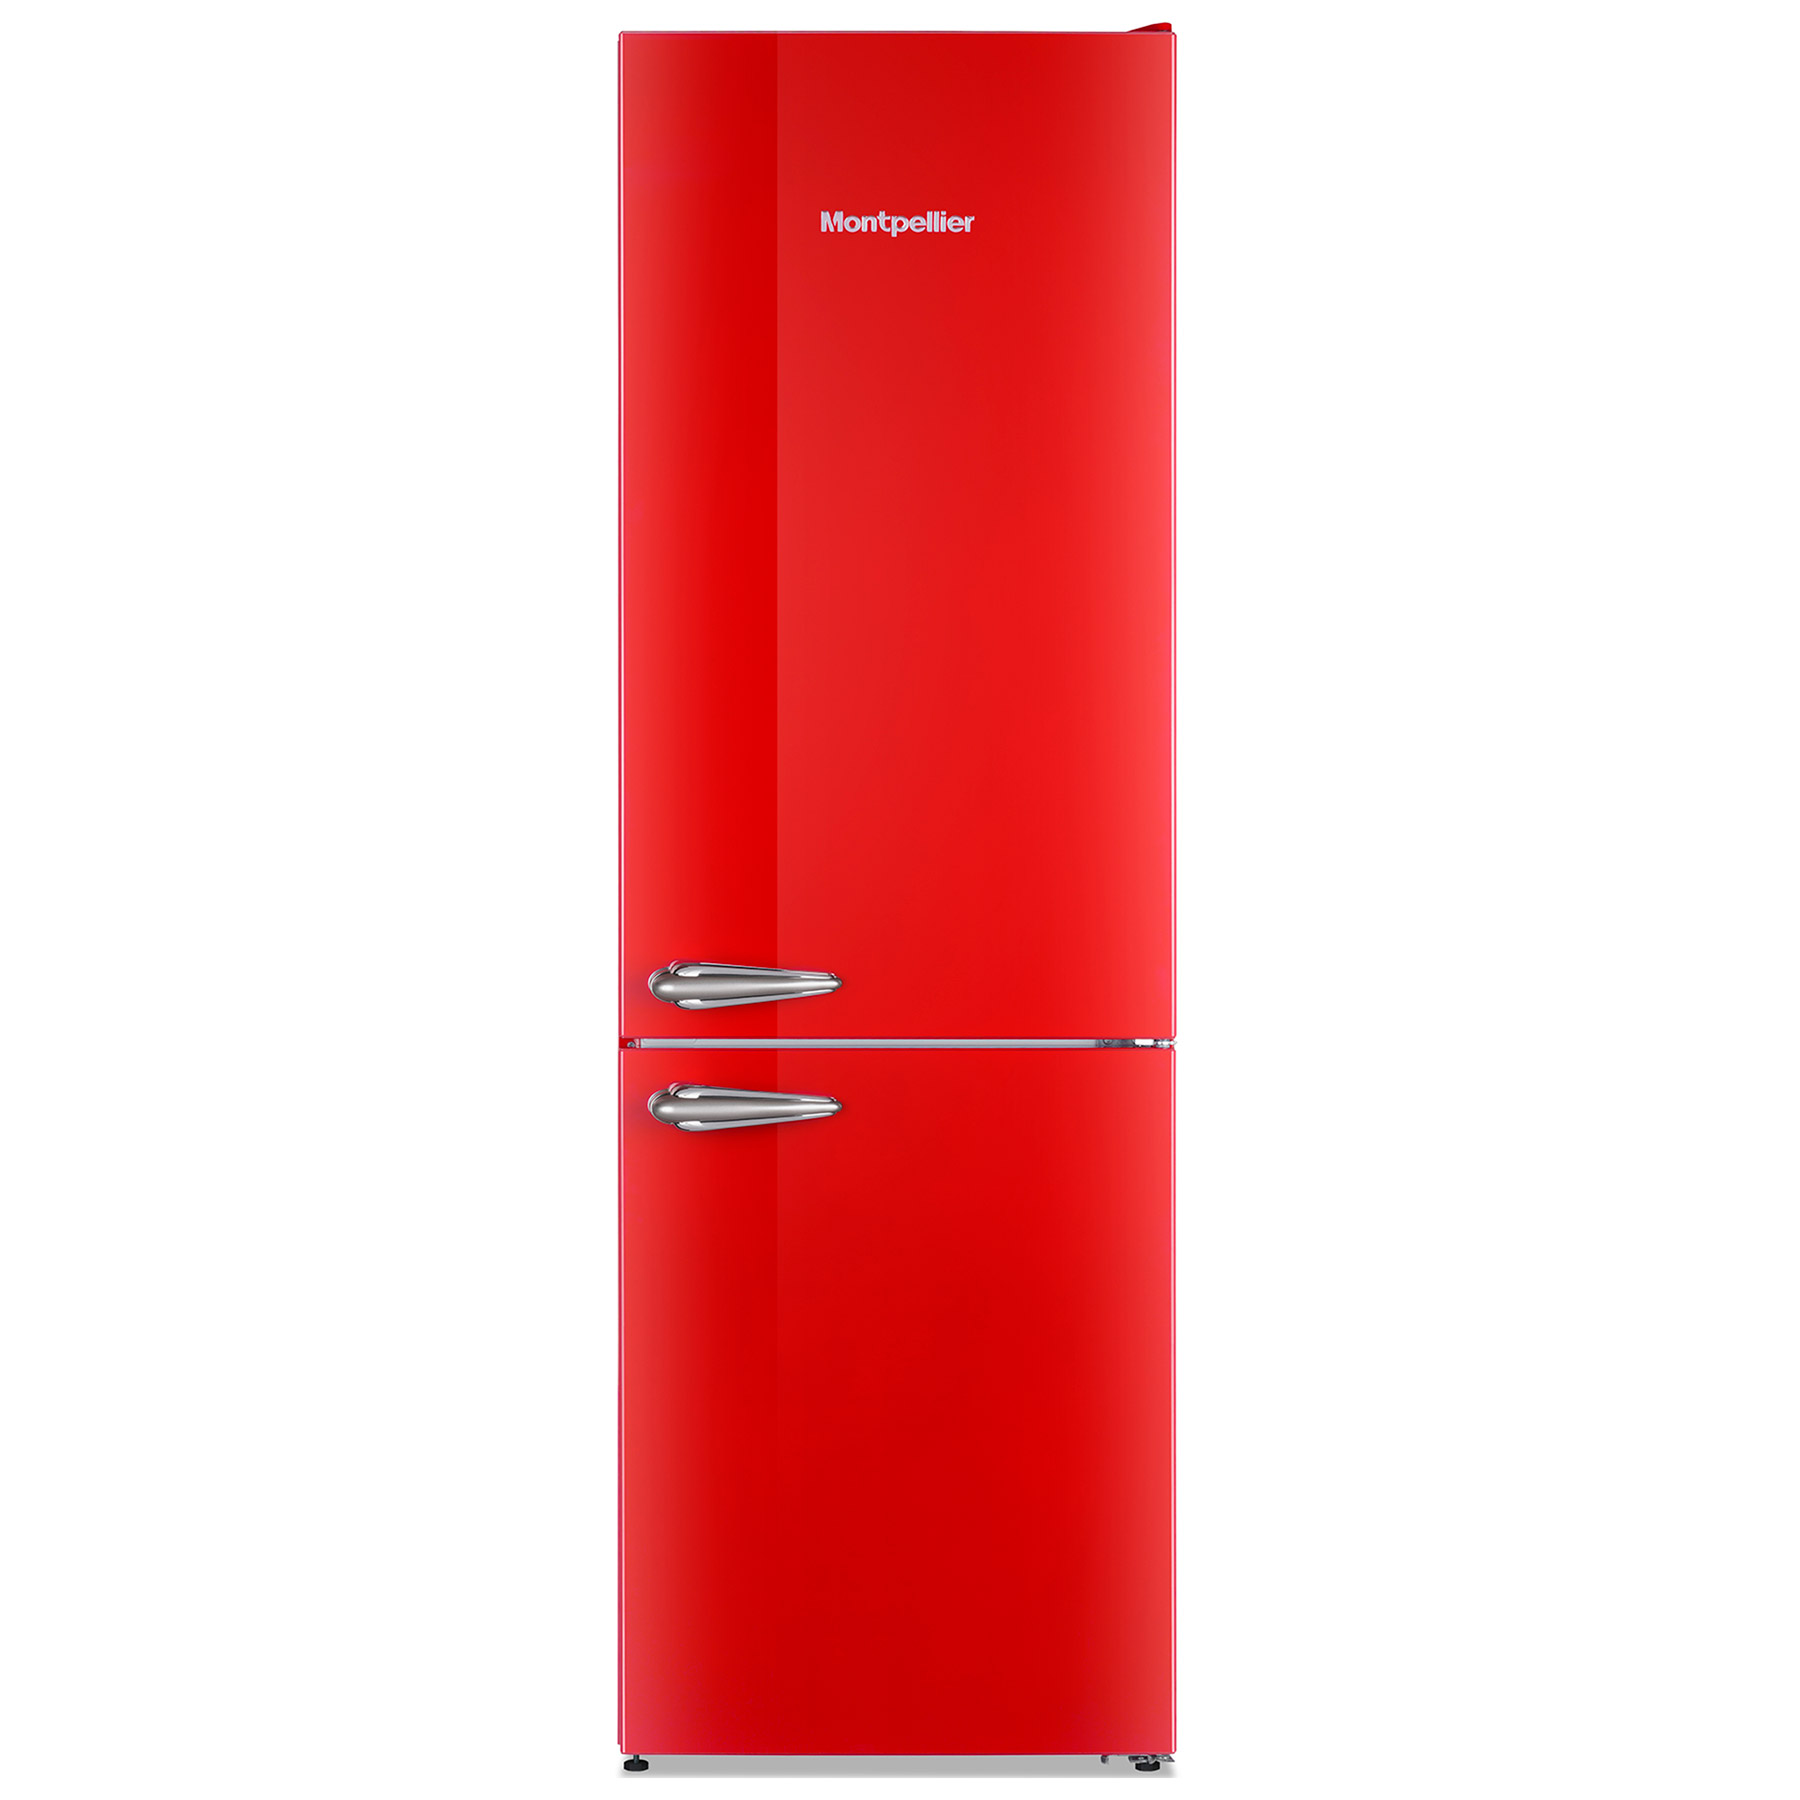 Image of Montpellier MAB386R 60cm Frost Free Retro Fridge Freezer in Red 1 86m